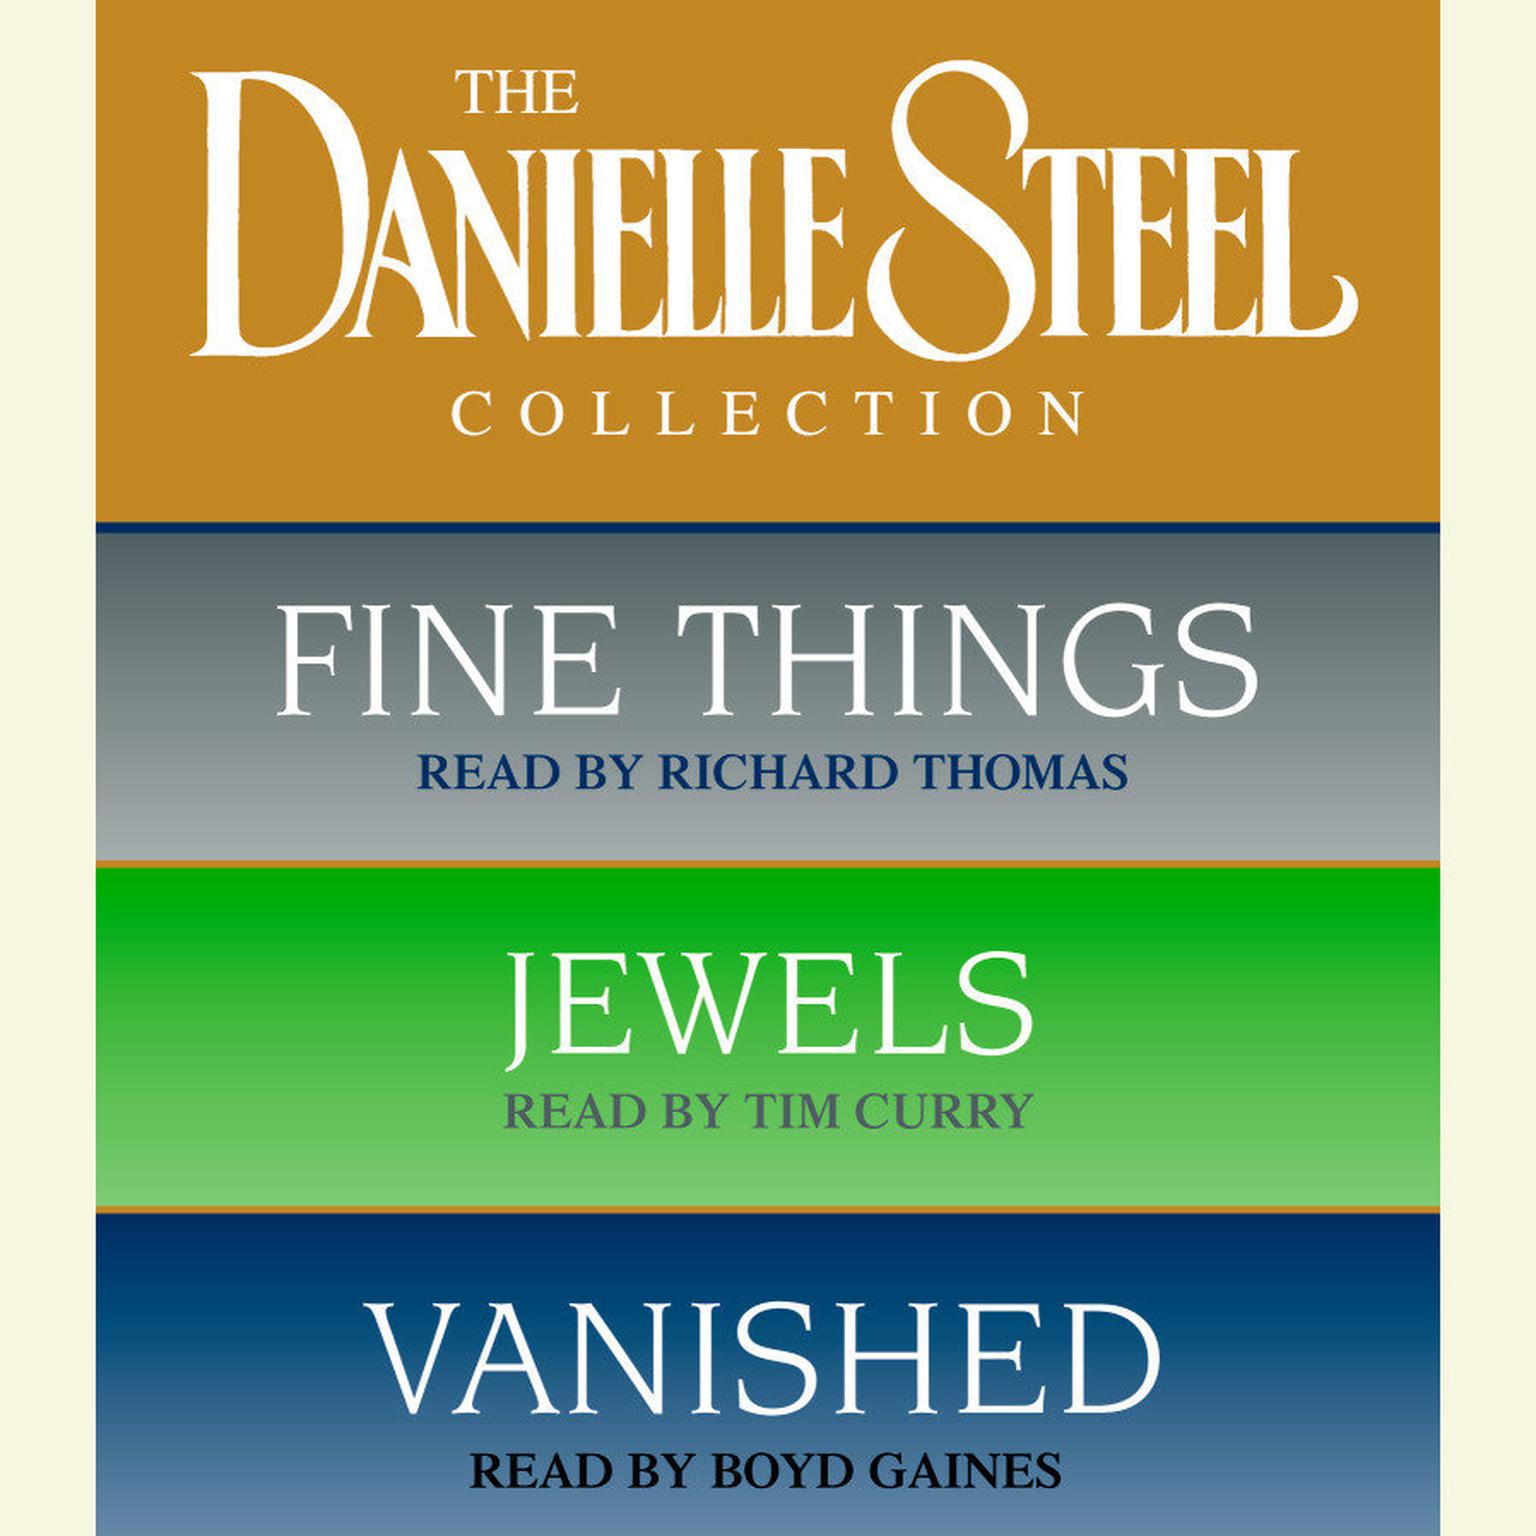 Danielle Steel Value Collection (Abridged): Fine Things, Jewels, Vanished Audiobook, by Danielle Steel